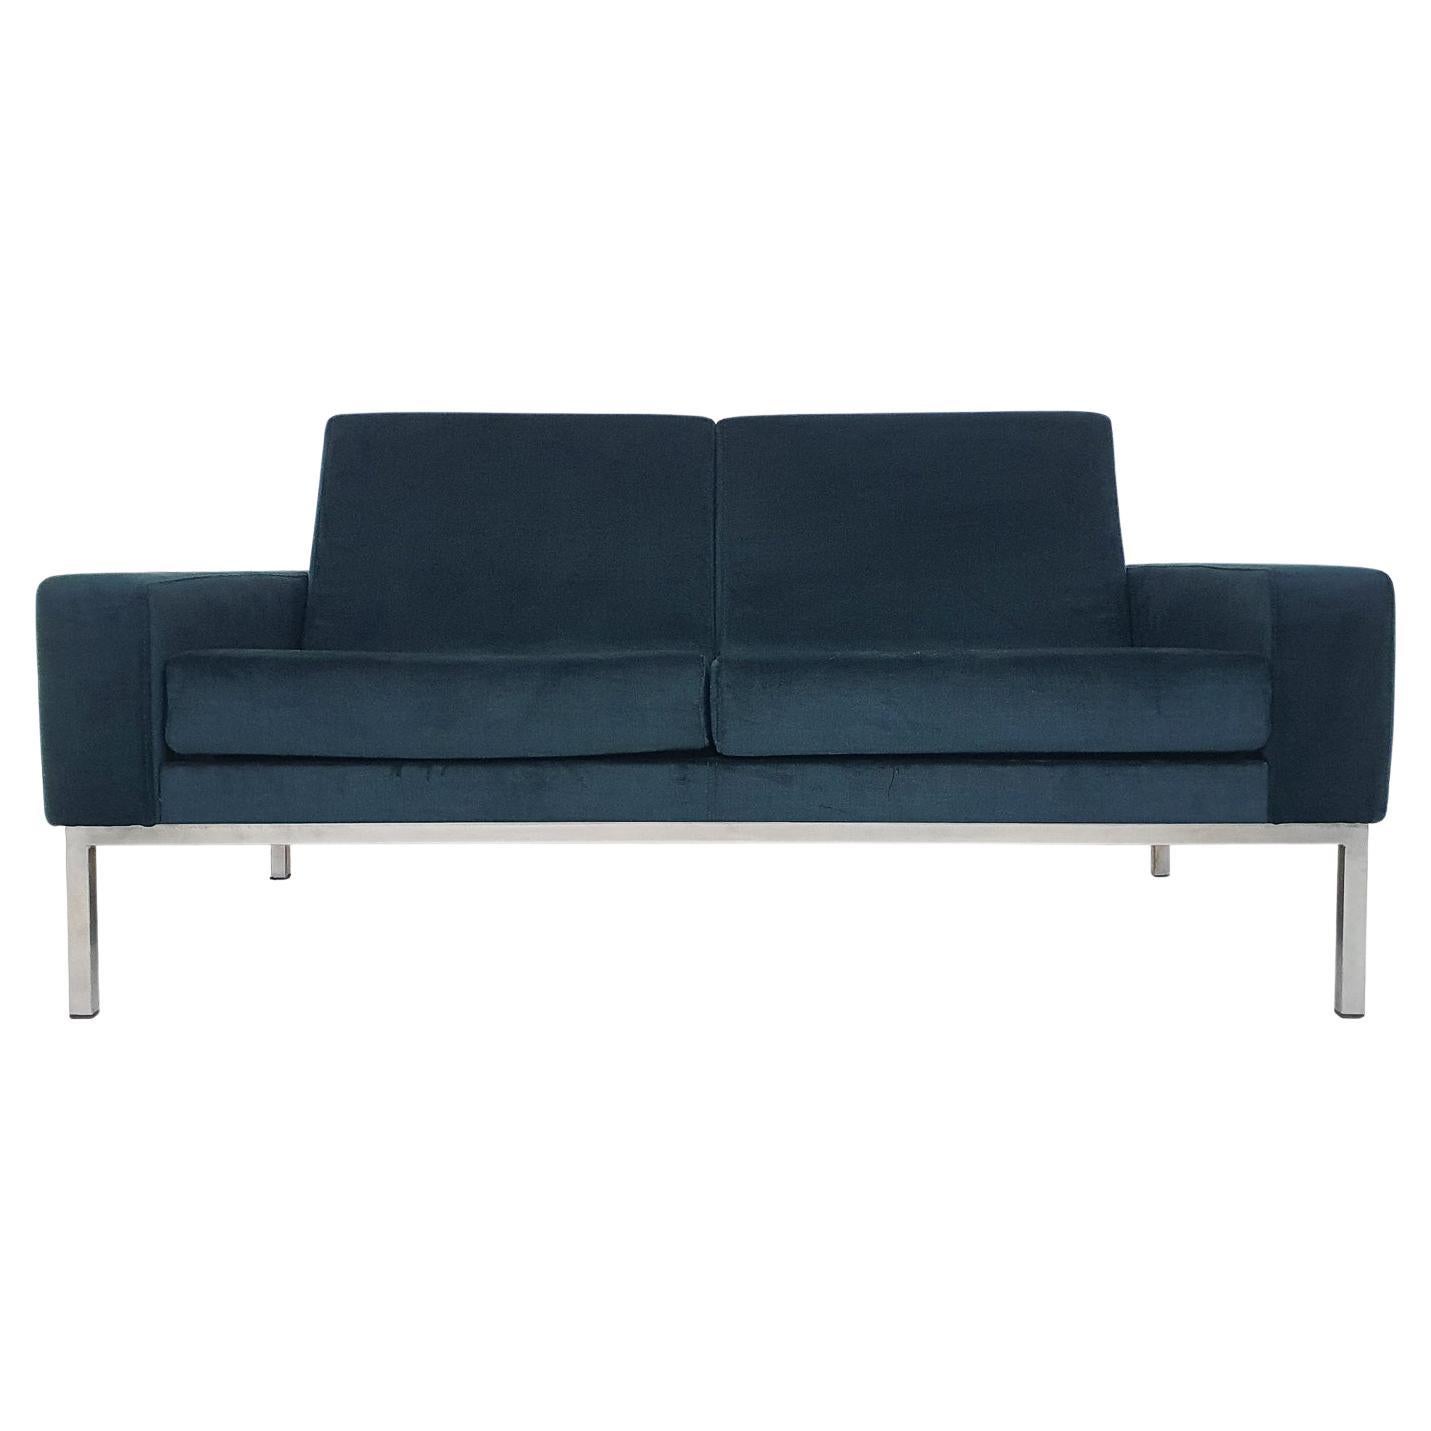 Two-Seater Sofa Attrb to Gelderland, The Netherlands 1950's For Sale